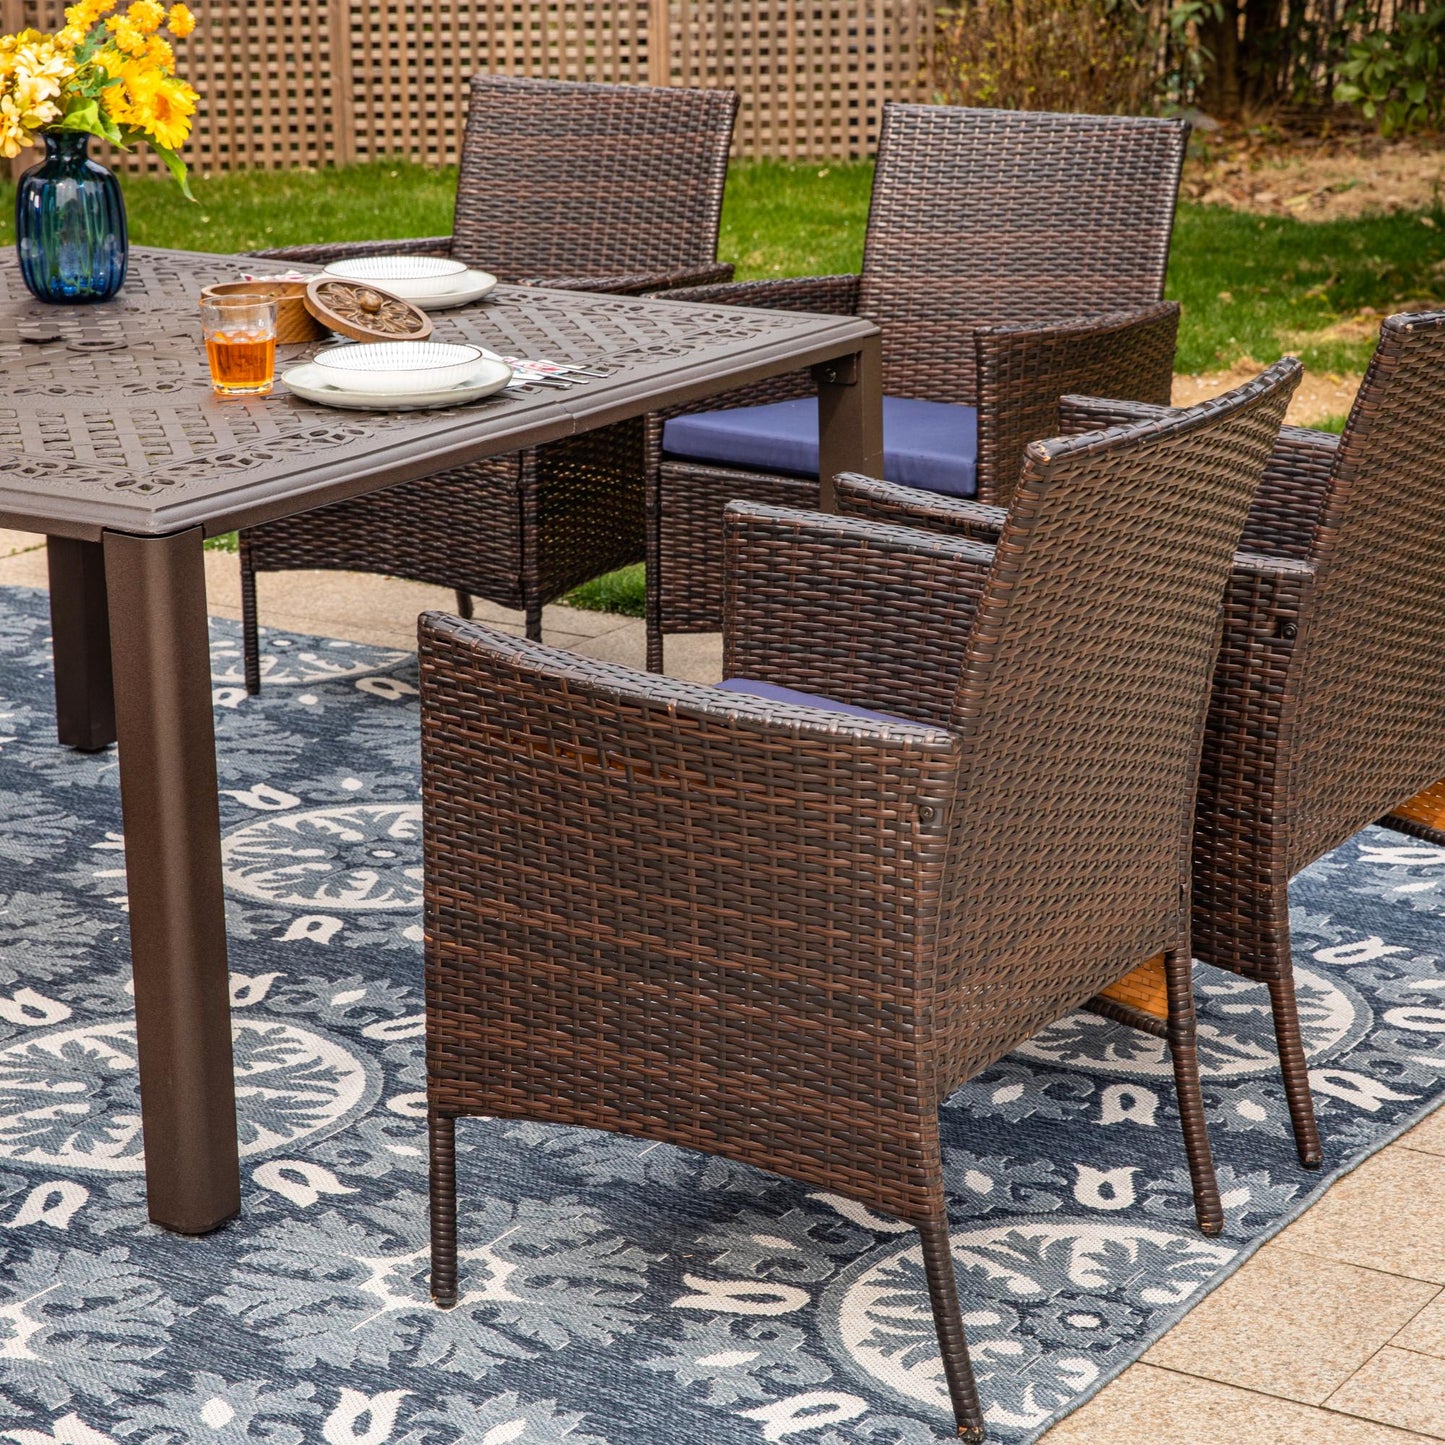 Sophia & William 9 Pieces Cast Aluminum Outdoor Patio Dining Set with Square Metal Dining Table & Cushioned Wicker Rattan Chairs for 8